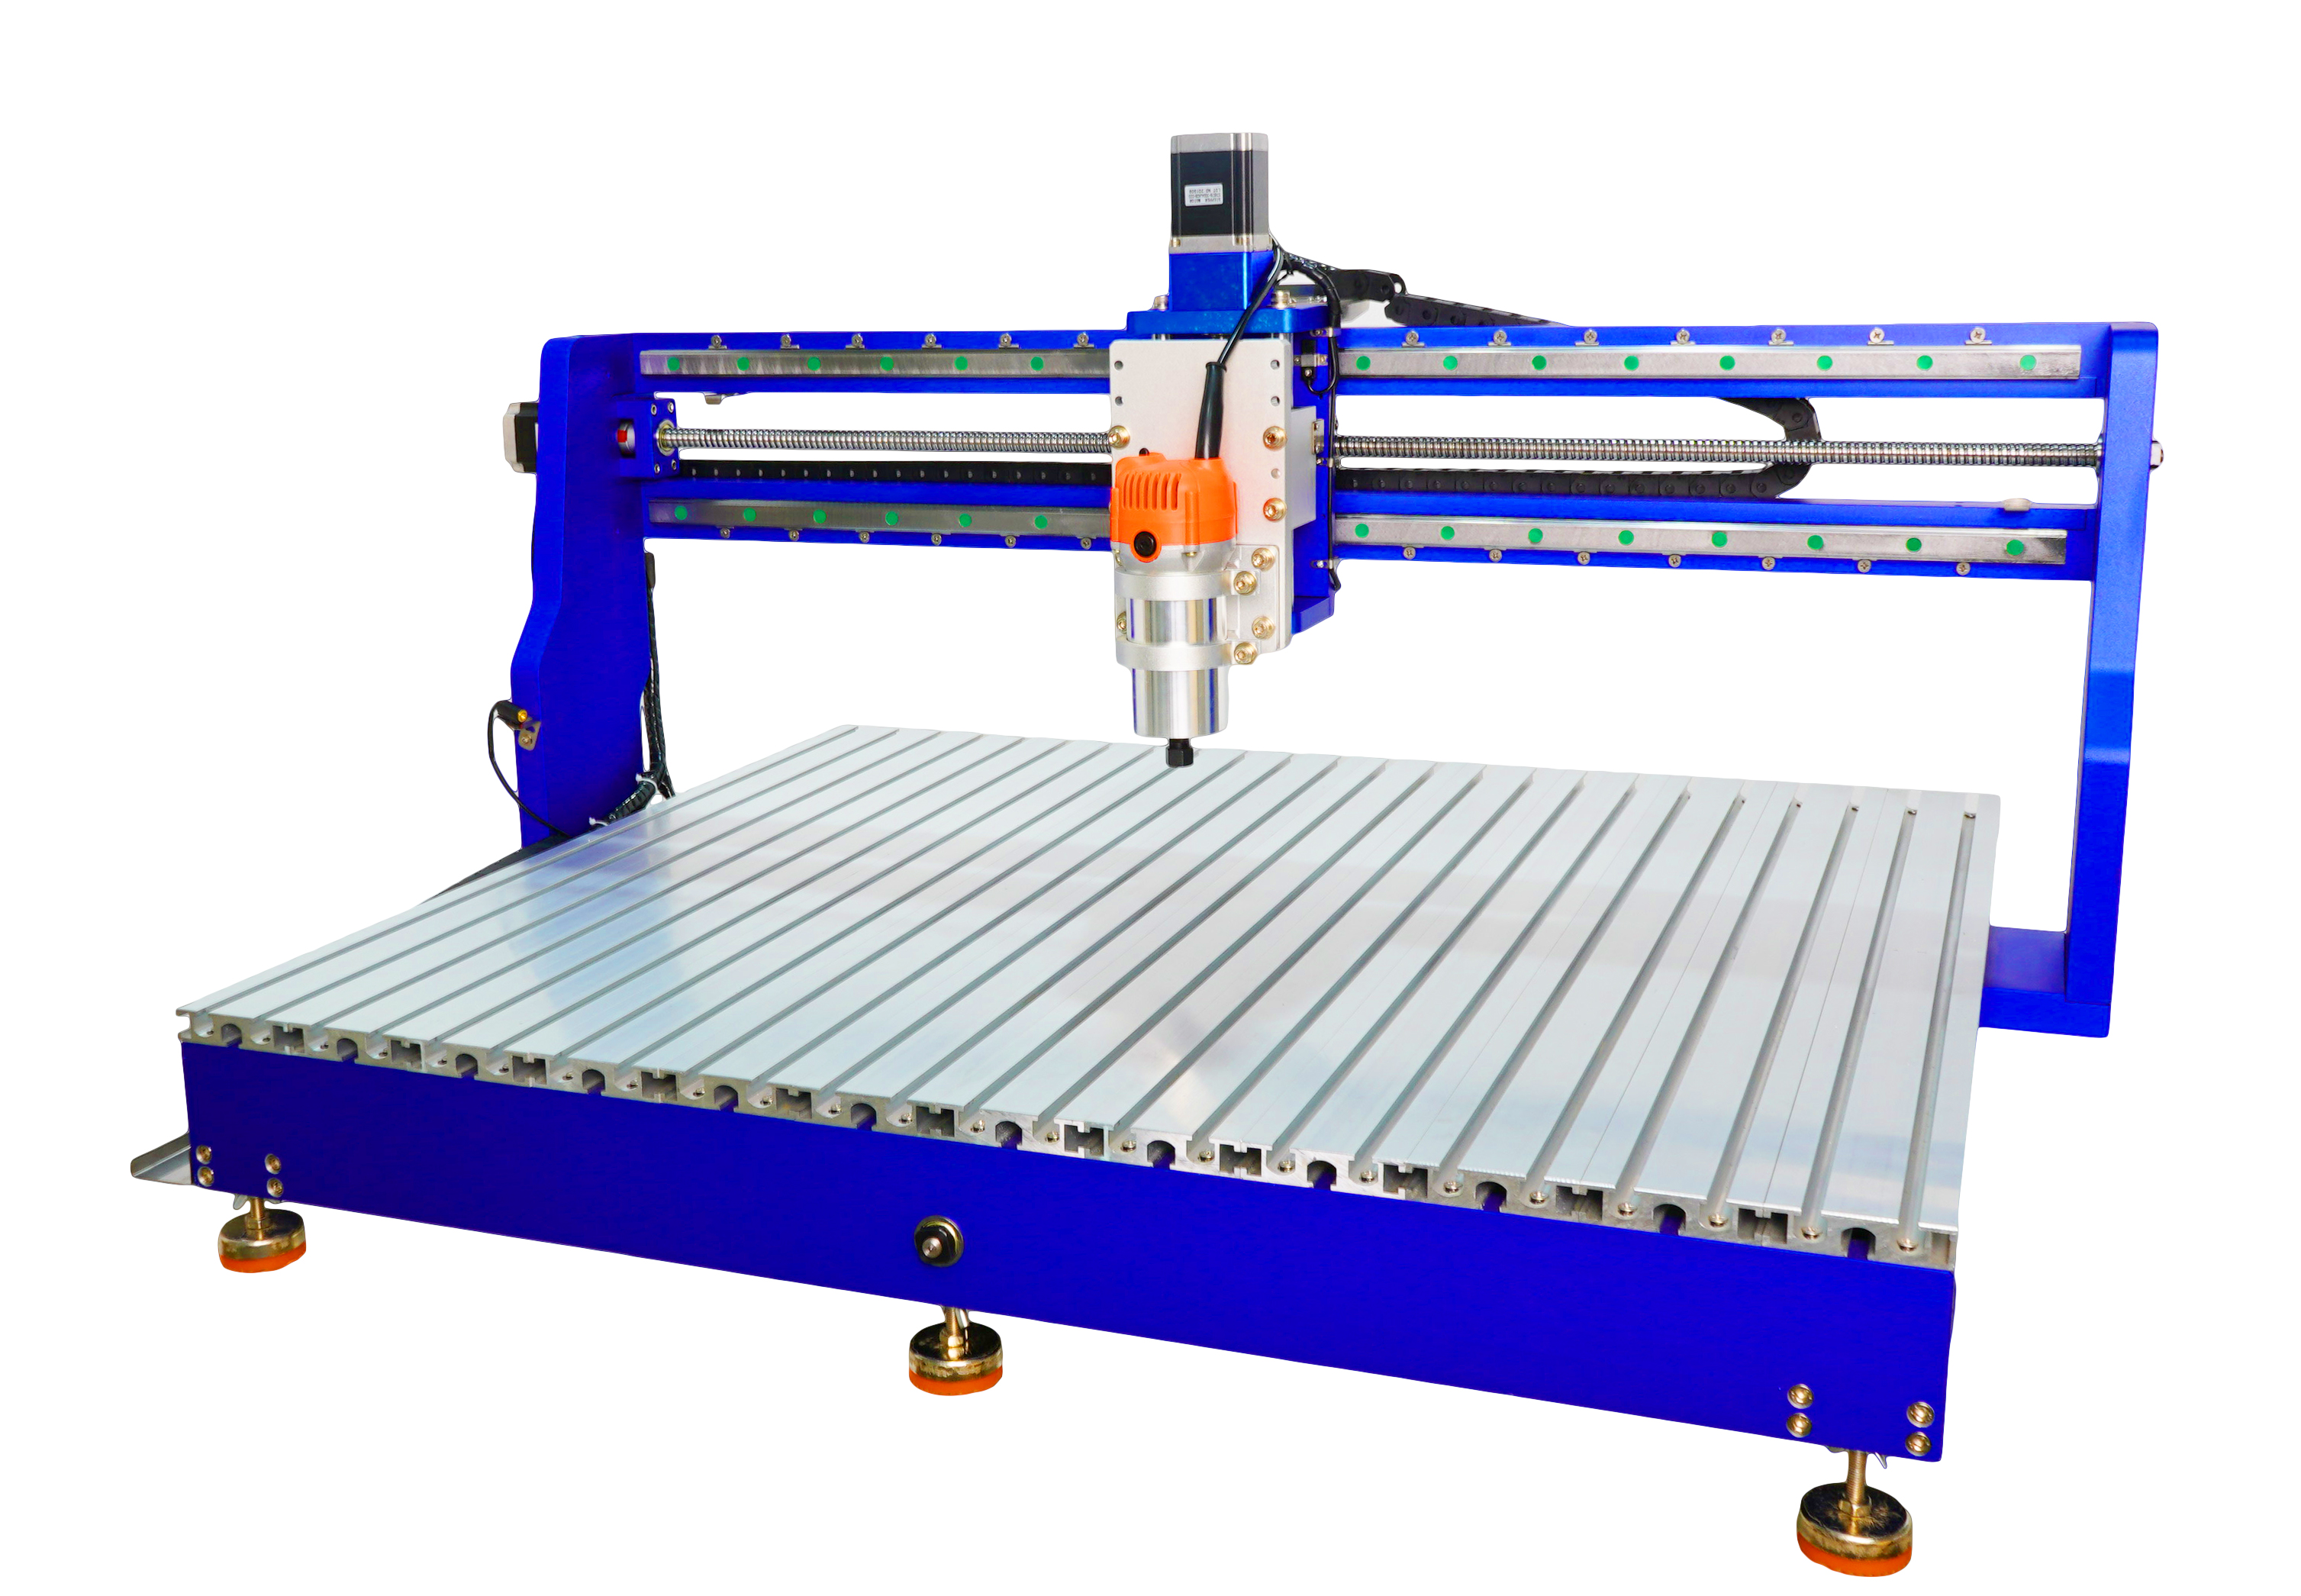 24″ x 36″ Smart Desktop CNC Router 6090 For Advertising, Woodworking